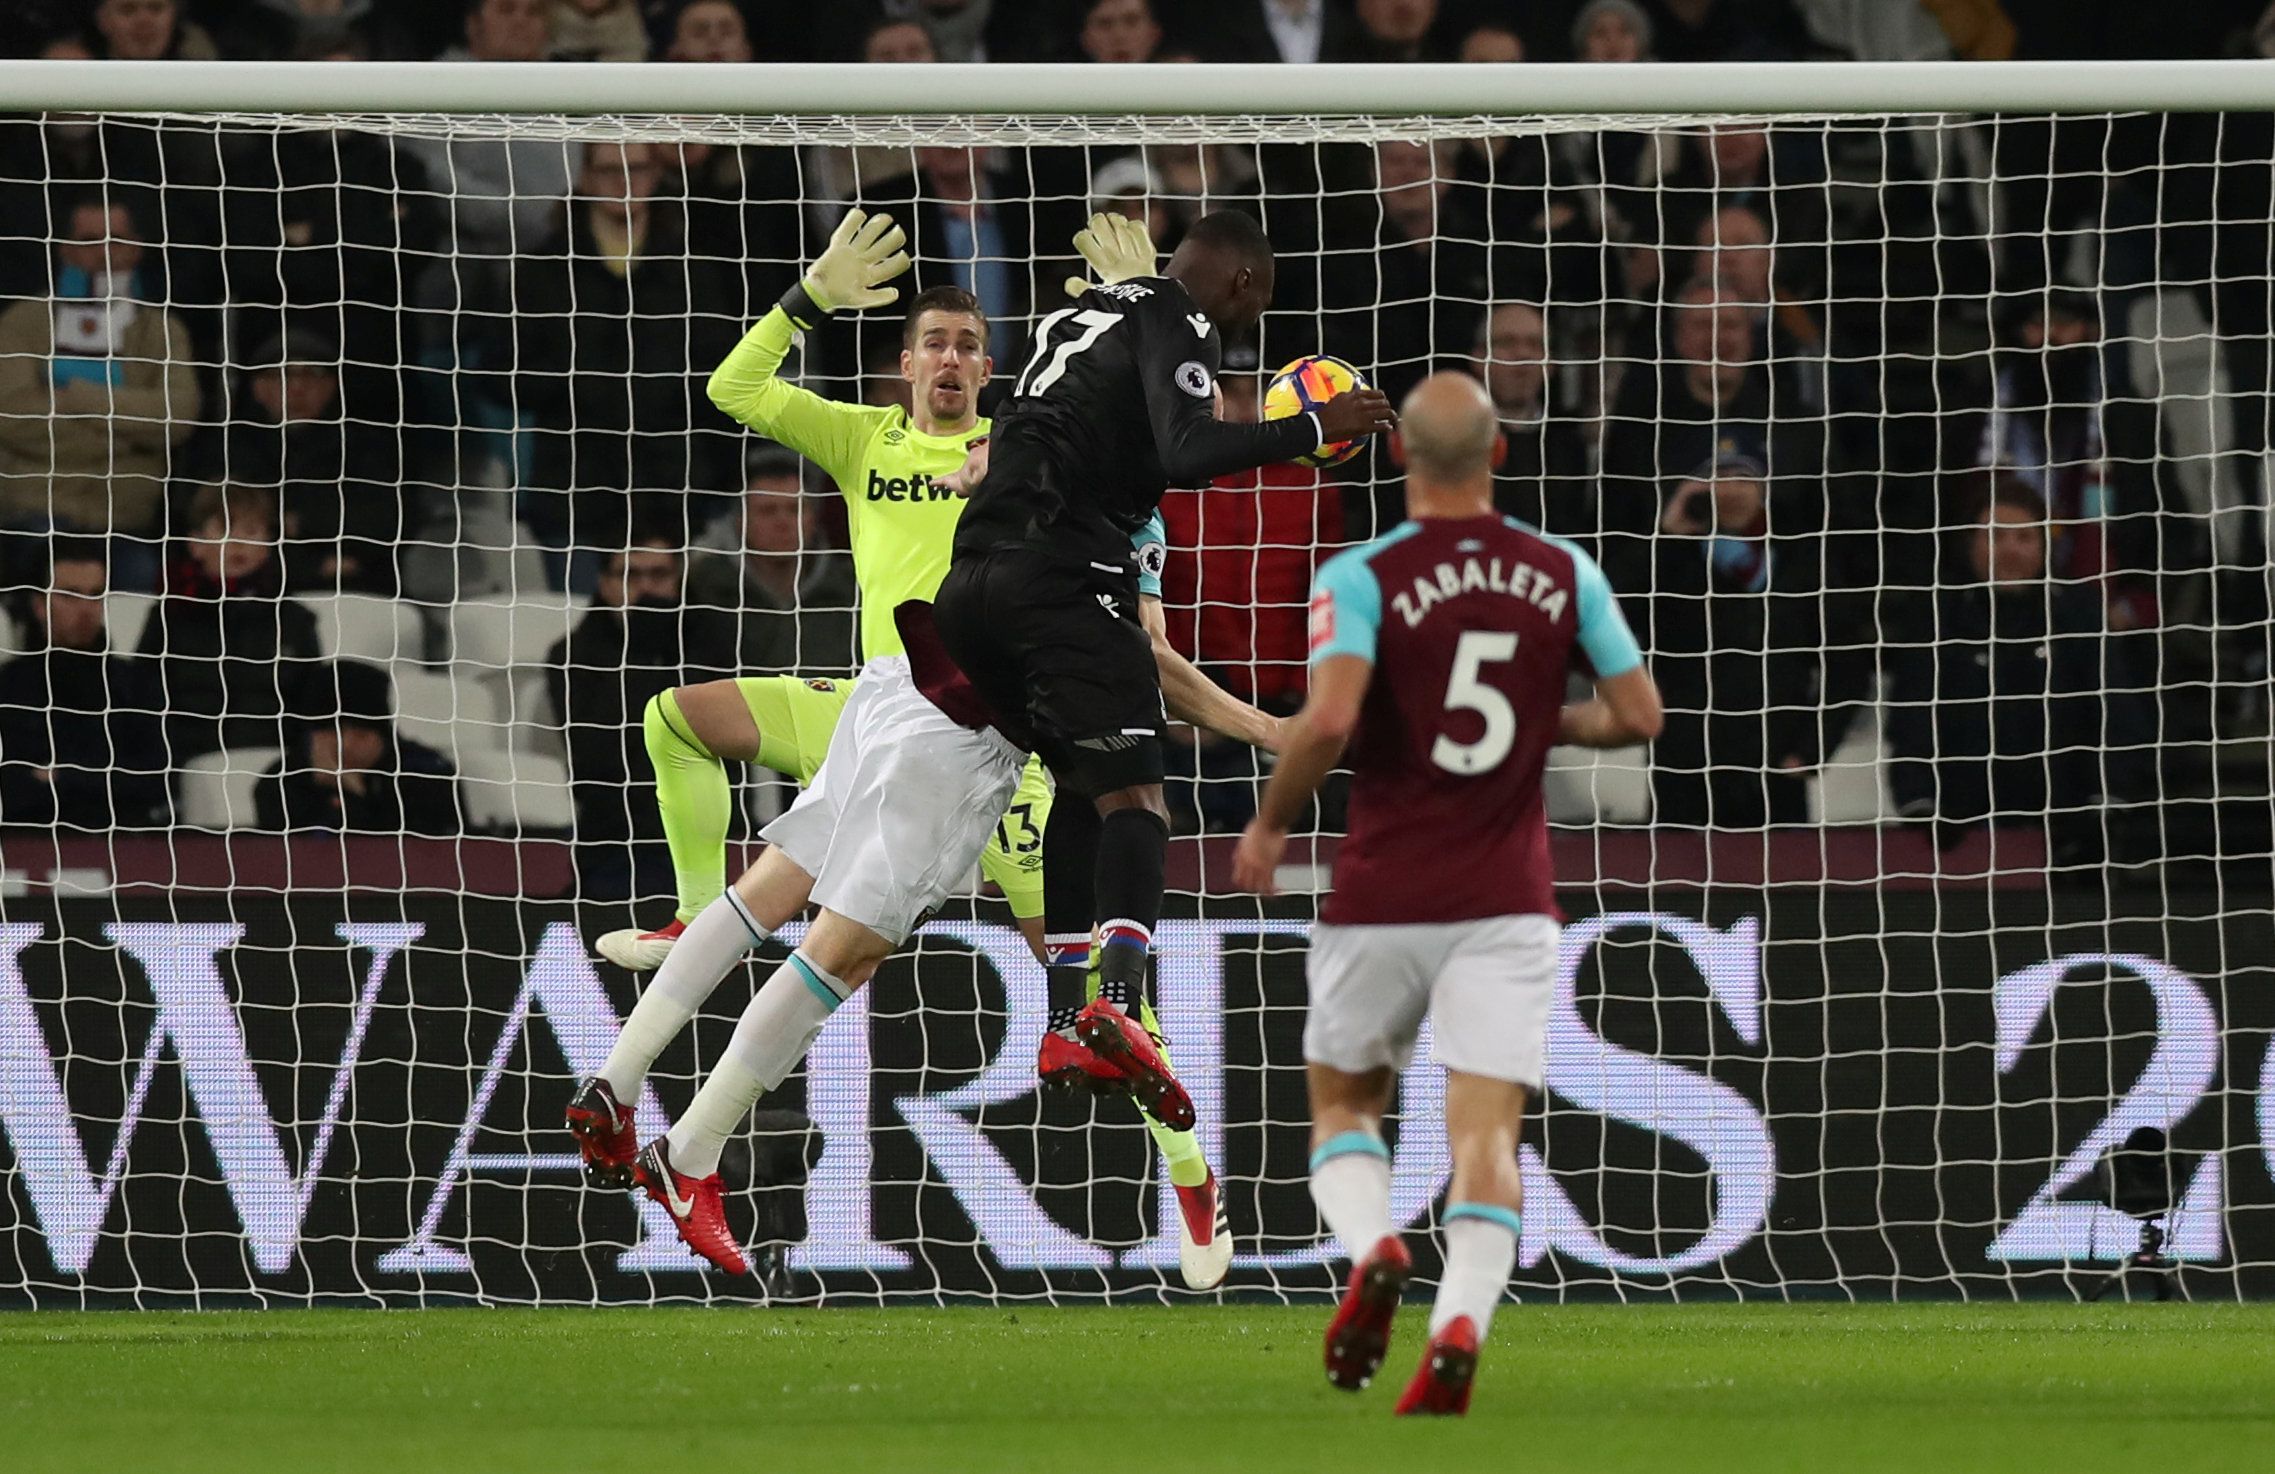 Soccer Football - Premier League - West Ham United vs Crystal Palace - London Stadium, London, Britain - January 30, 2018   Crystal Palace's Christian Benteke scores their first goal    Action Images via Reuters/Peter Cziborra    EDITORIAL USE ONLY. No use with unauthorized audio, video, data, fixture lists, club/league logos or "live" services. Online in-match use limited to 75 images, no video emulation. No use in betting, games or single club/league/player publications.  Please contact your a